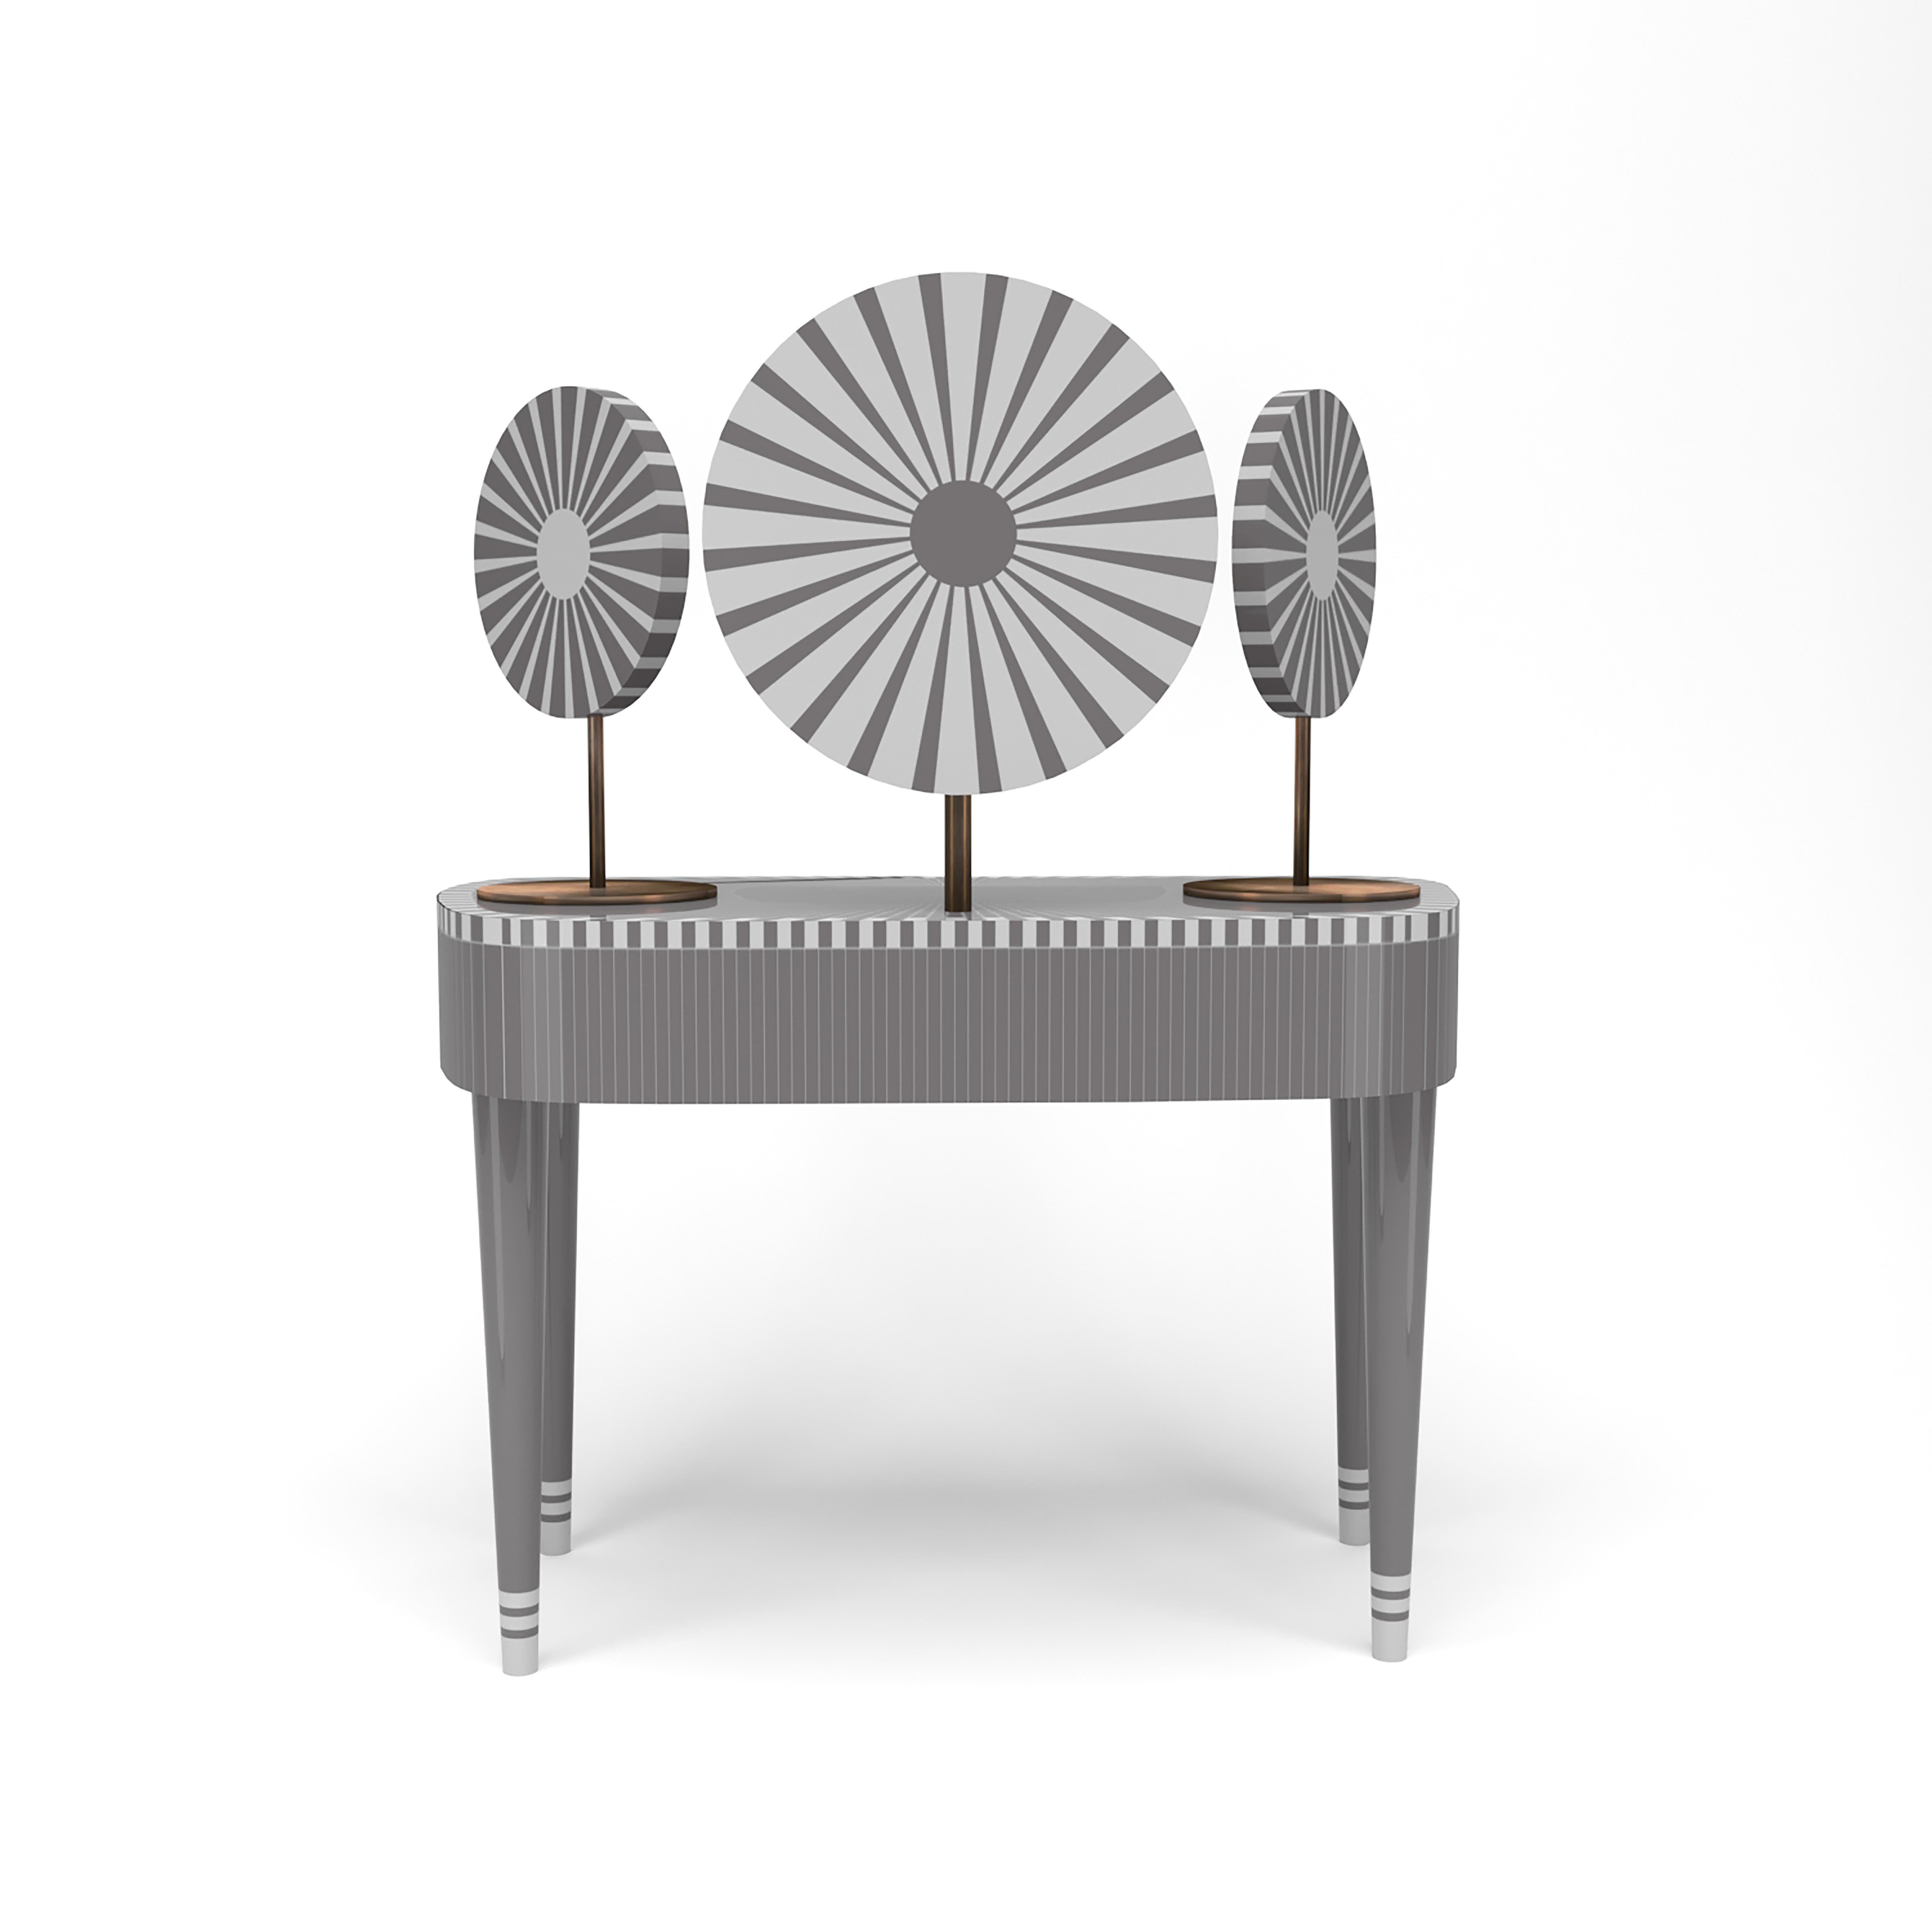 Woman in Paris Gray and White Vanity Table by Matteo Cibic is a stunning dressing table with two drawers and three mirrors, two of which can be moved to desired angles. It is available in a range of colors, which can be customised according to the